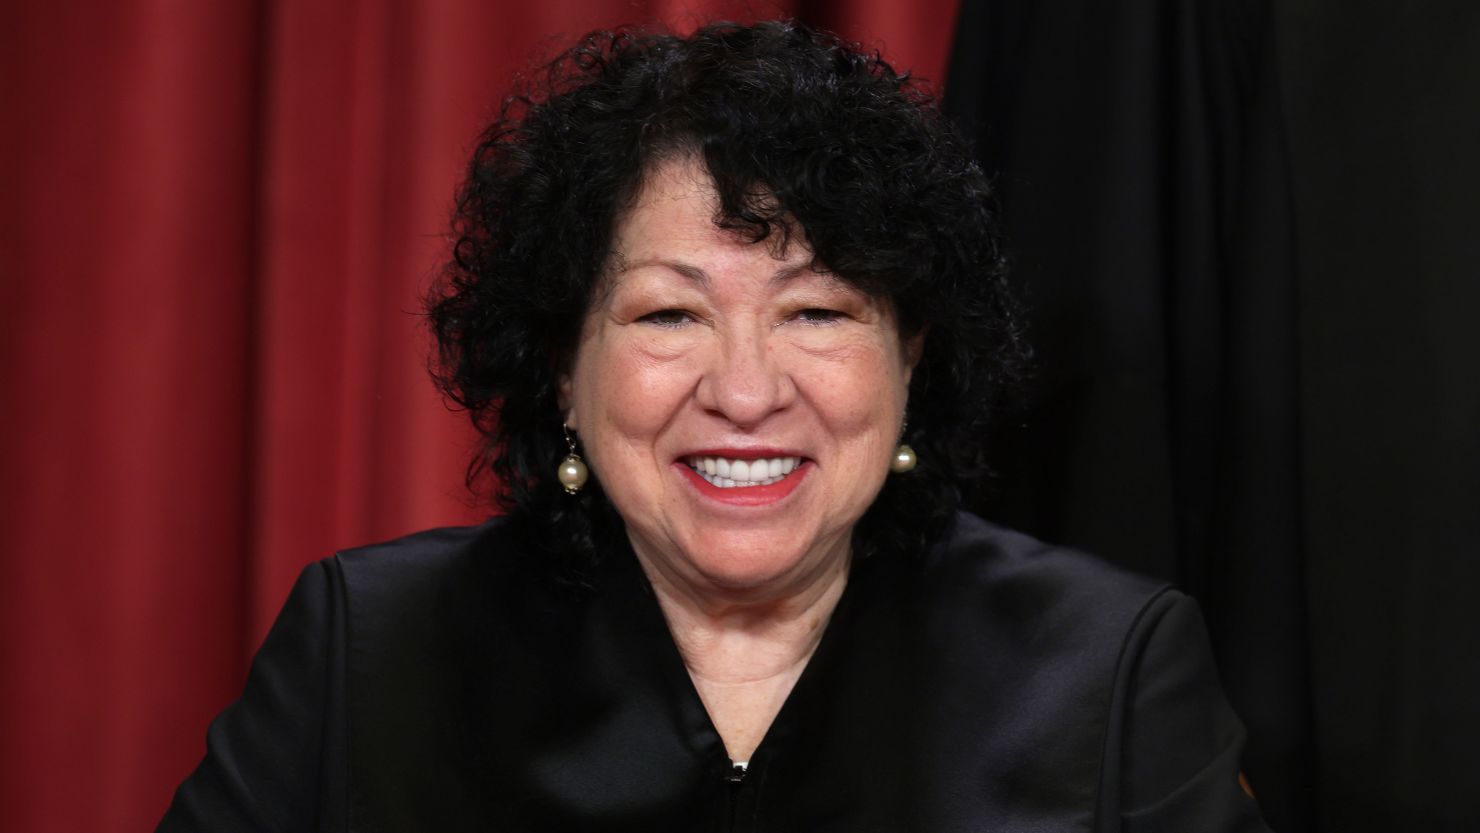 Supreme Court Justice Sonia Sotomayor poses for an official portrait at the East Conference Room of the Supreme Court building on October 7, 2022 in Washington, DC. 